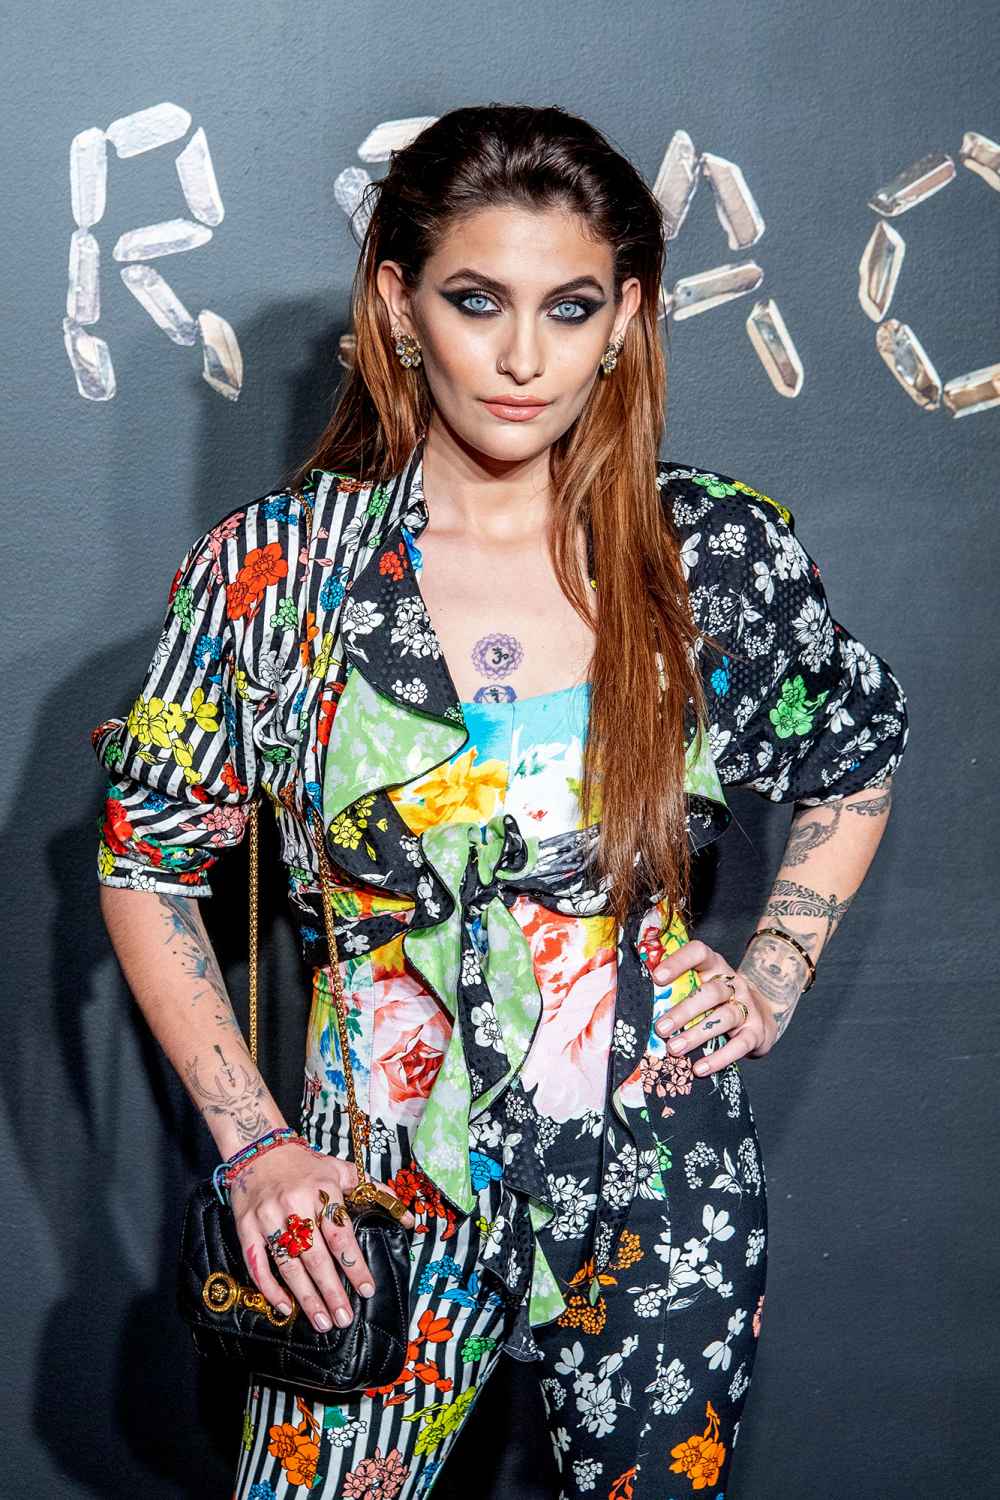 Paris Jackson Checks Into Treatment for Her ‘Physical and Emotional Health’